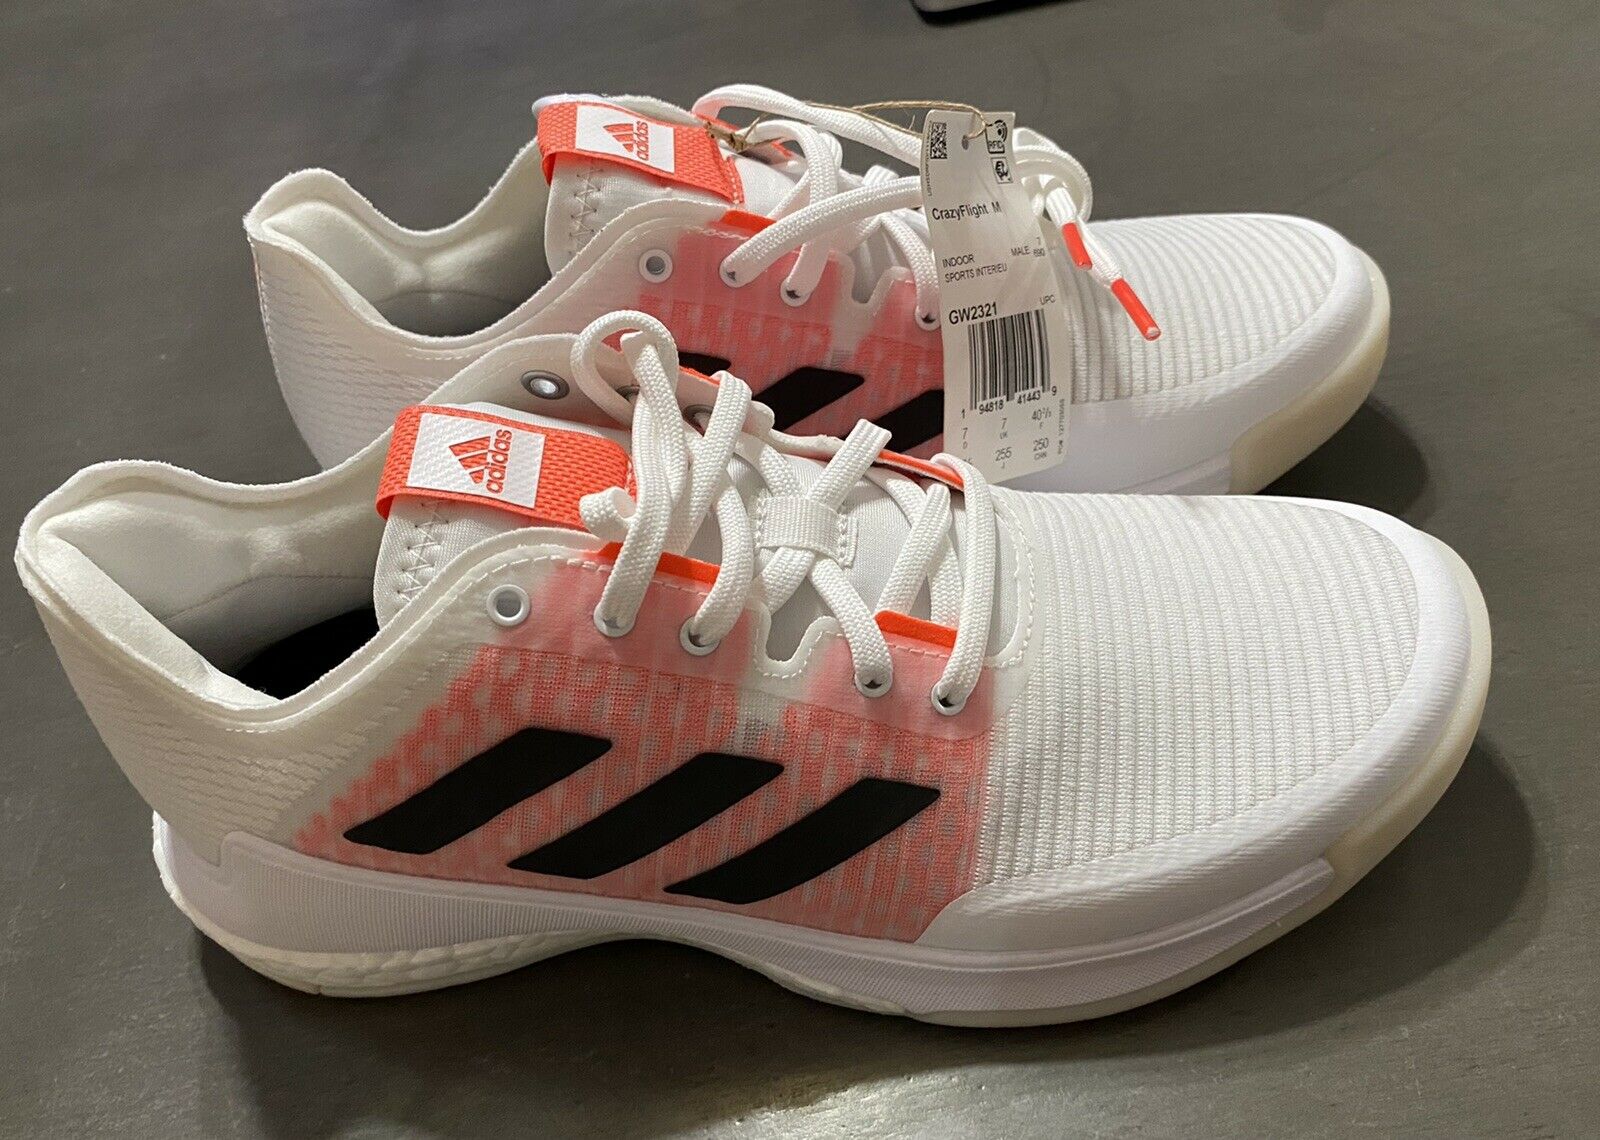 ADIDAS CRAZYFLIGHT TOKYO VOLLEYBALL SHOES MENS SIZE 7.5 WOMENS 9 NEW OLYMPICS